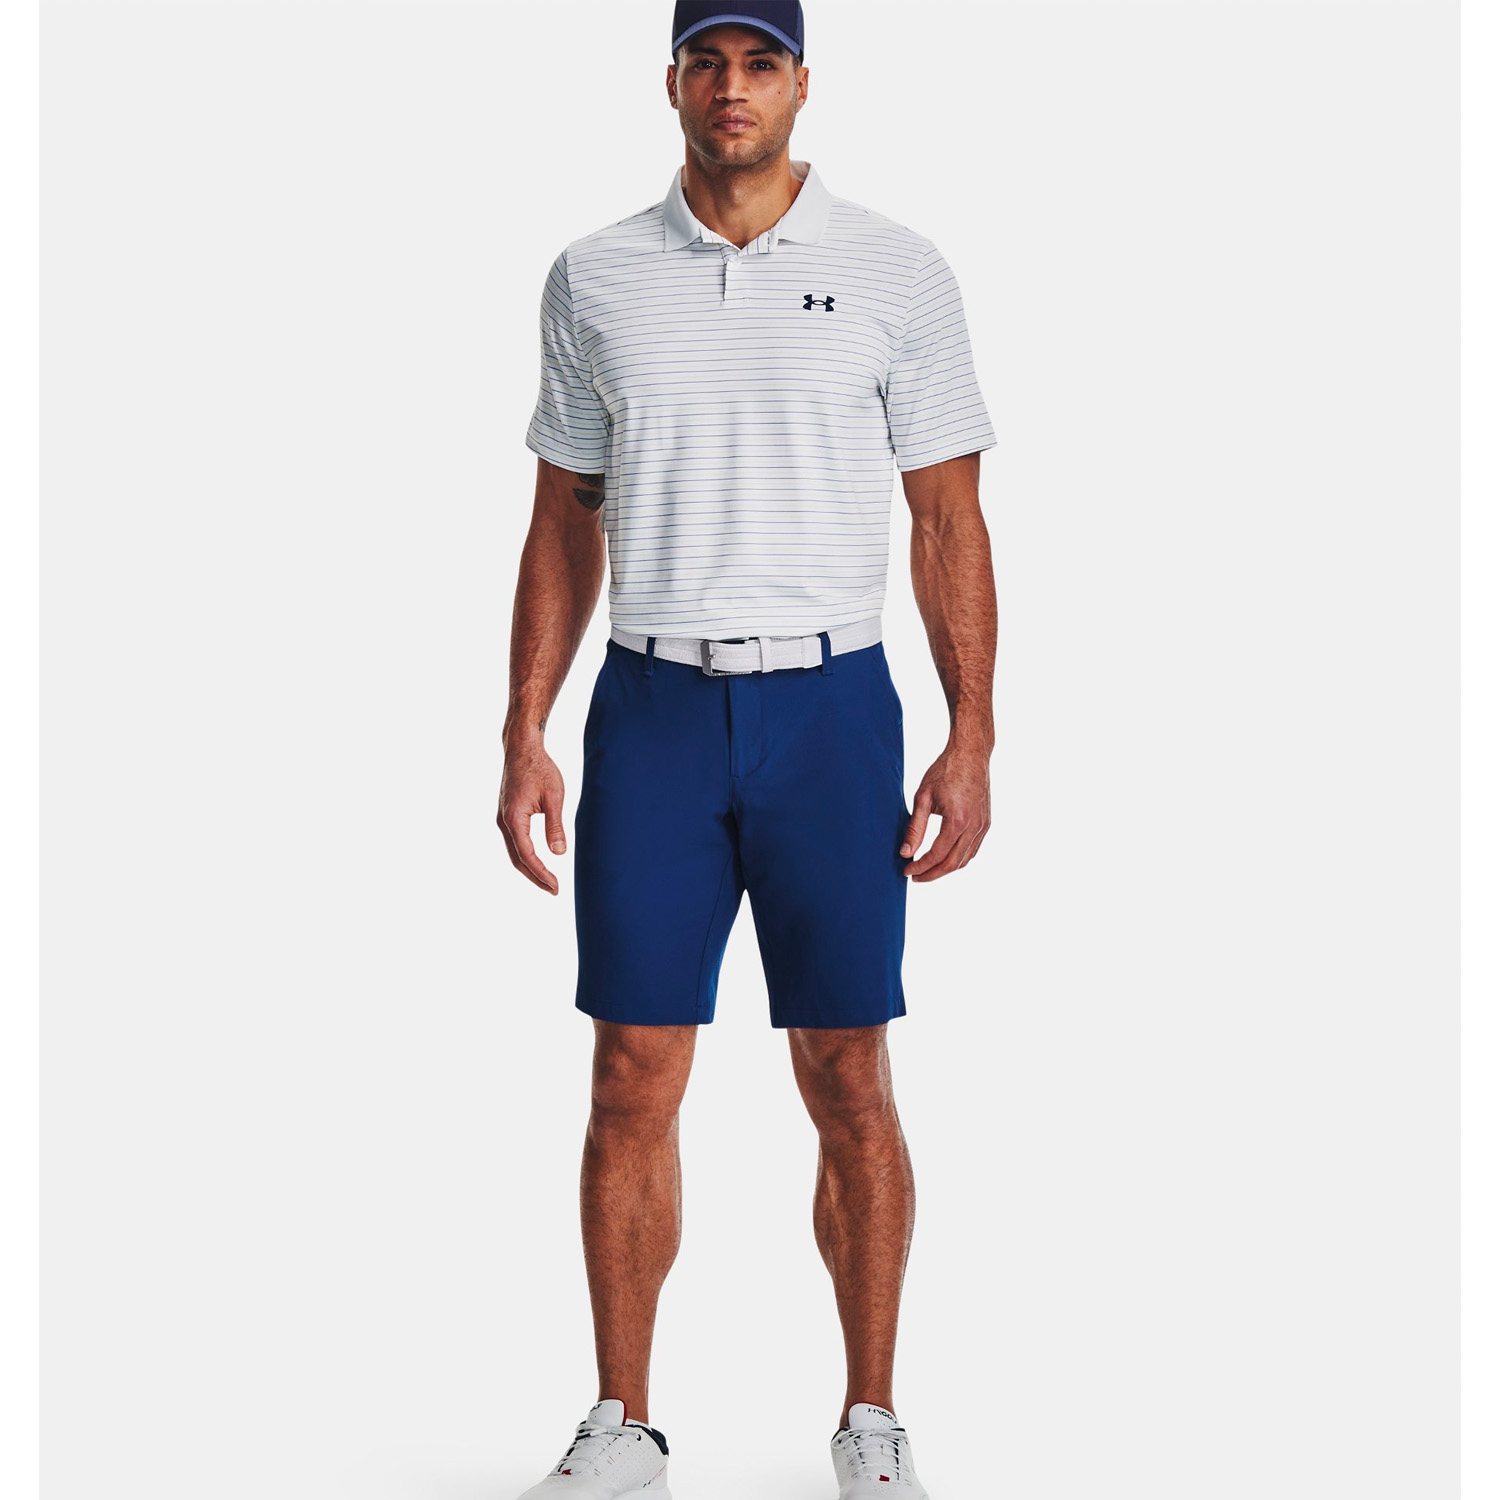 Under Armour Drive Short - White